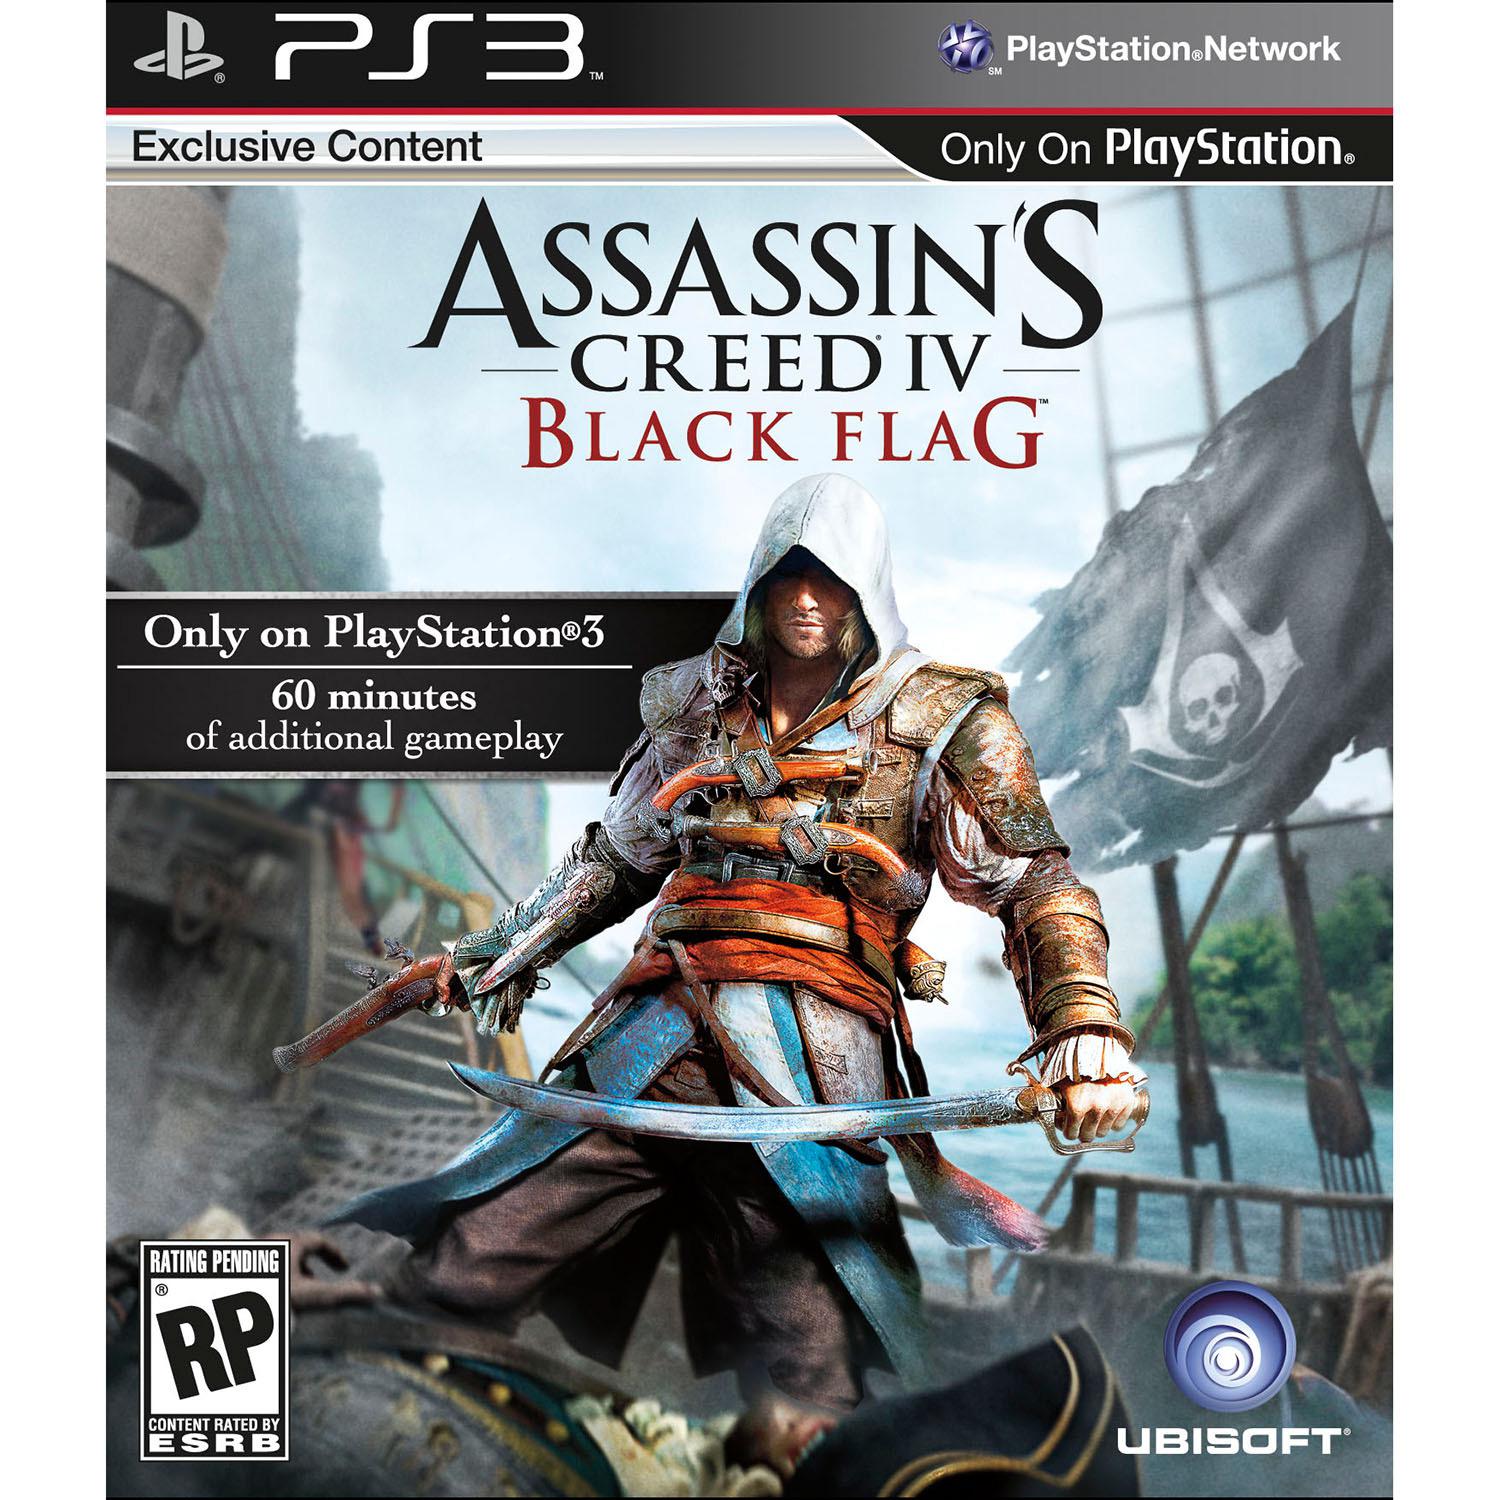 Game Assassin's Creed IV: Black Flag Limited Edition - PS3 é bom? Vale a pena?